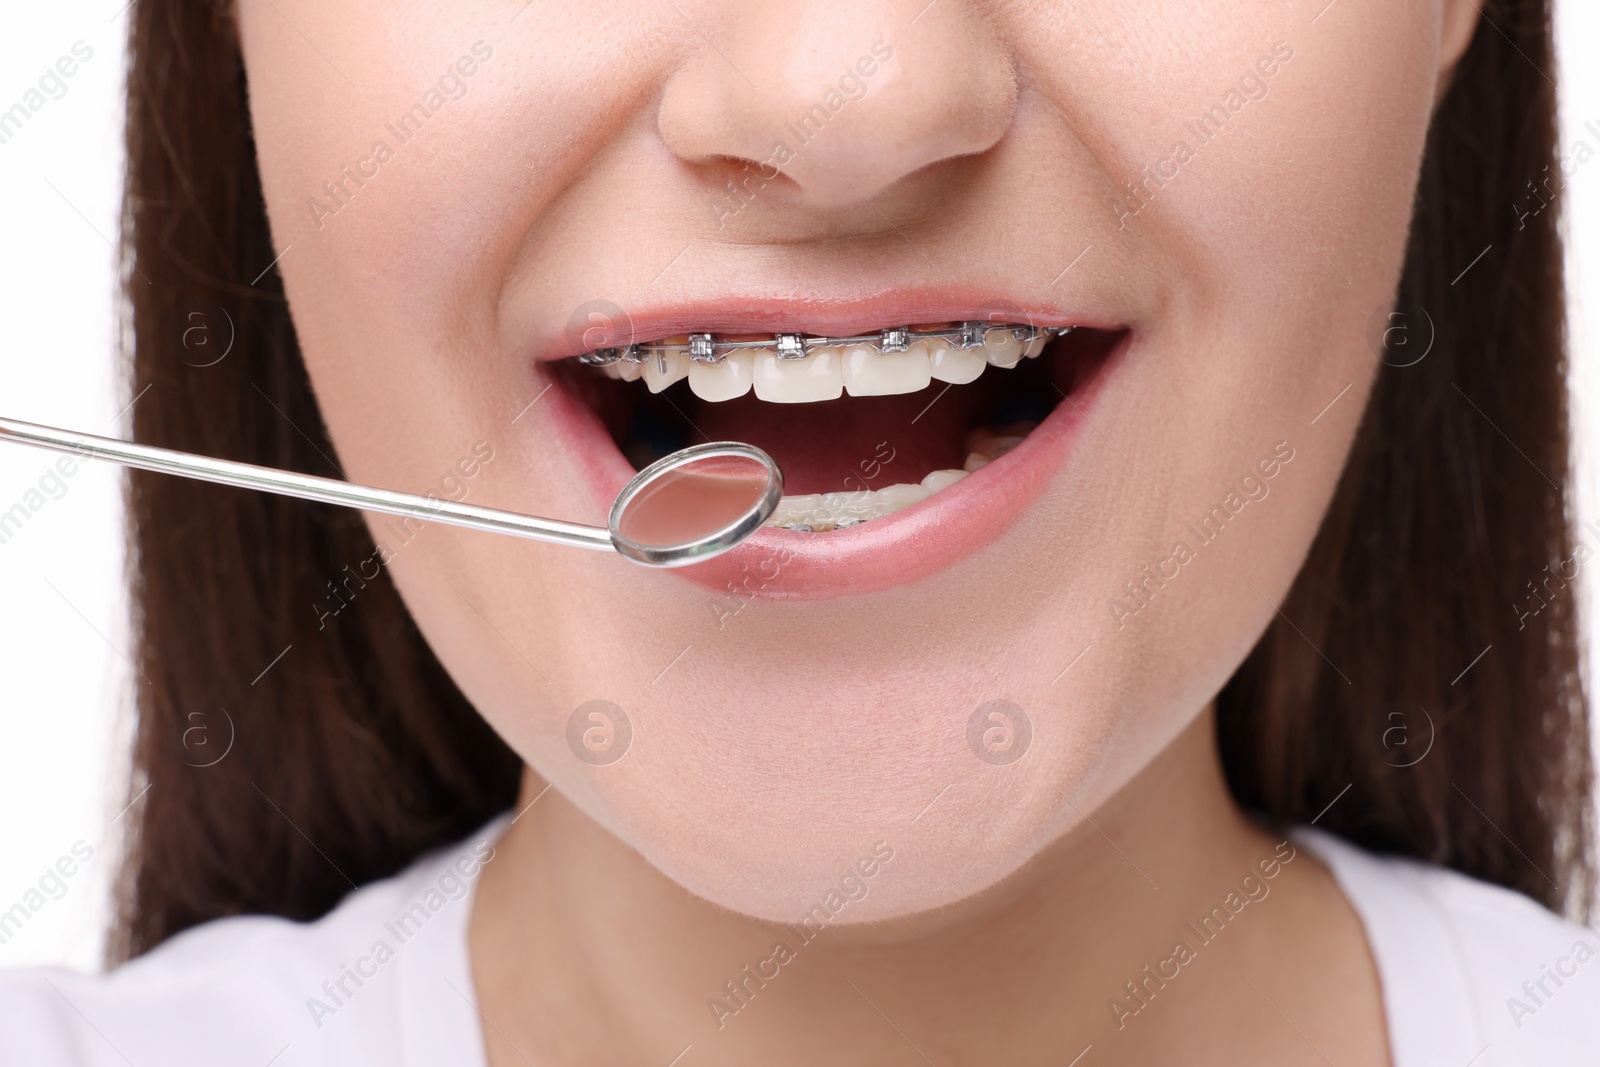 Photo of Examination of woman's teeth with braces using mirror tool, closeup